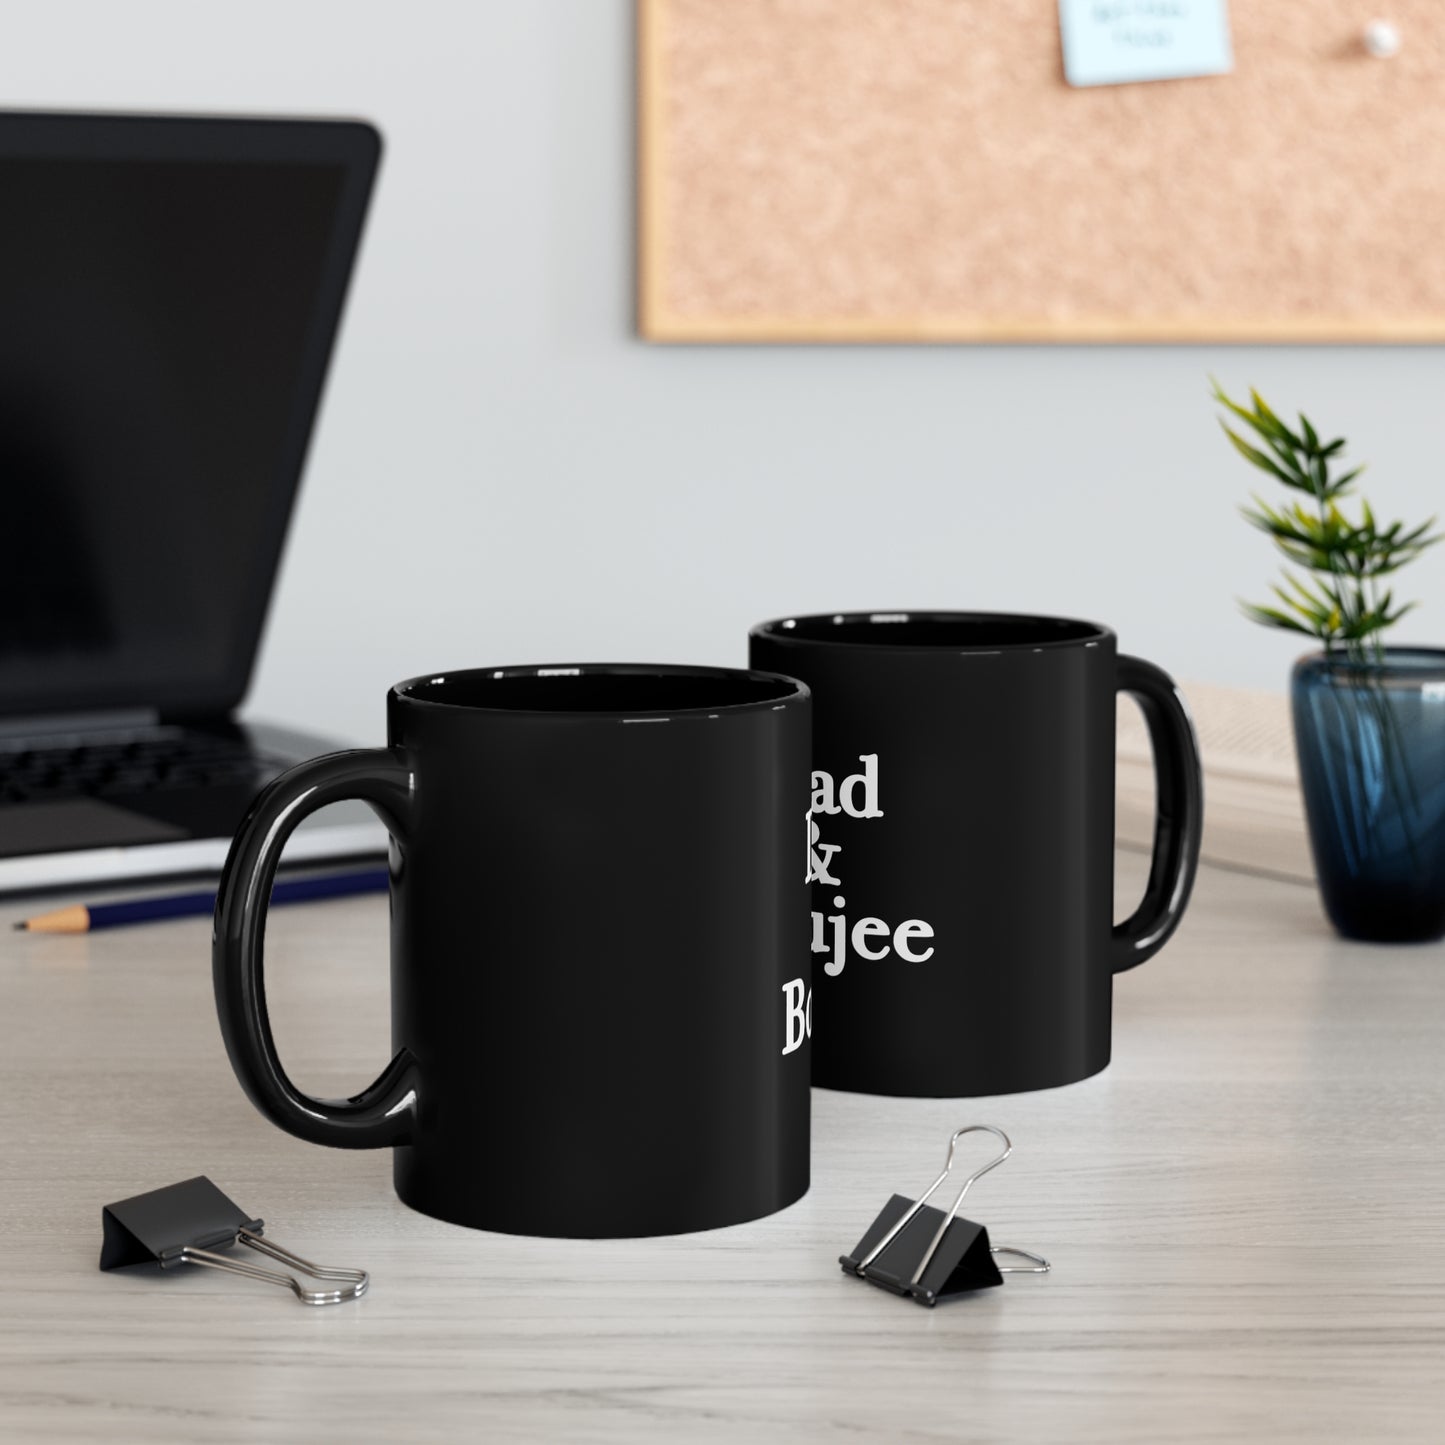 Dad & Boujee 11oz Black Mug Great Father's Day Gift for Dad, Dad and Boujee Mug for Dad